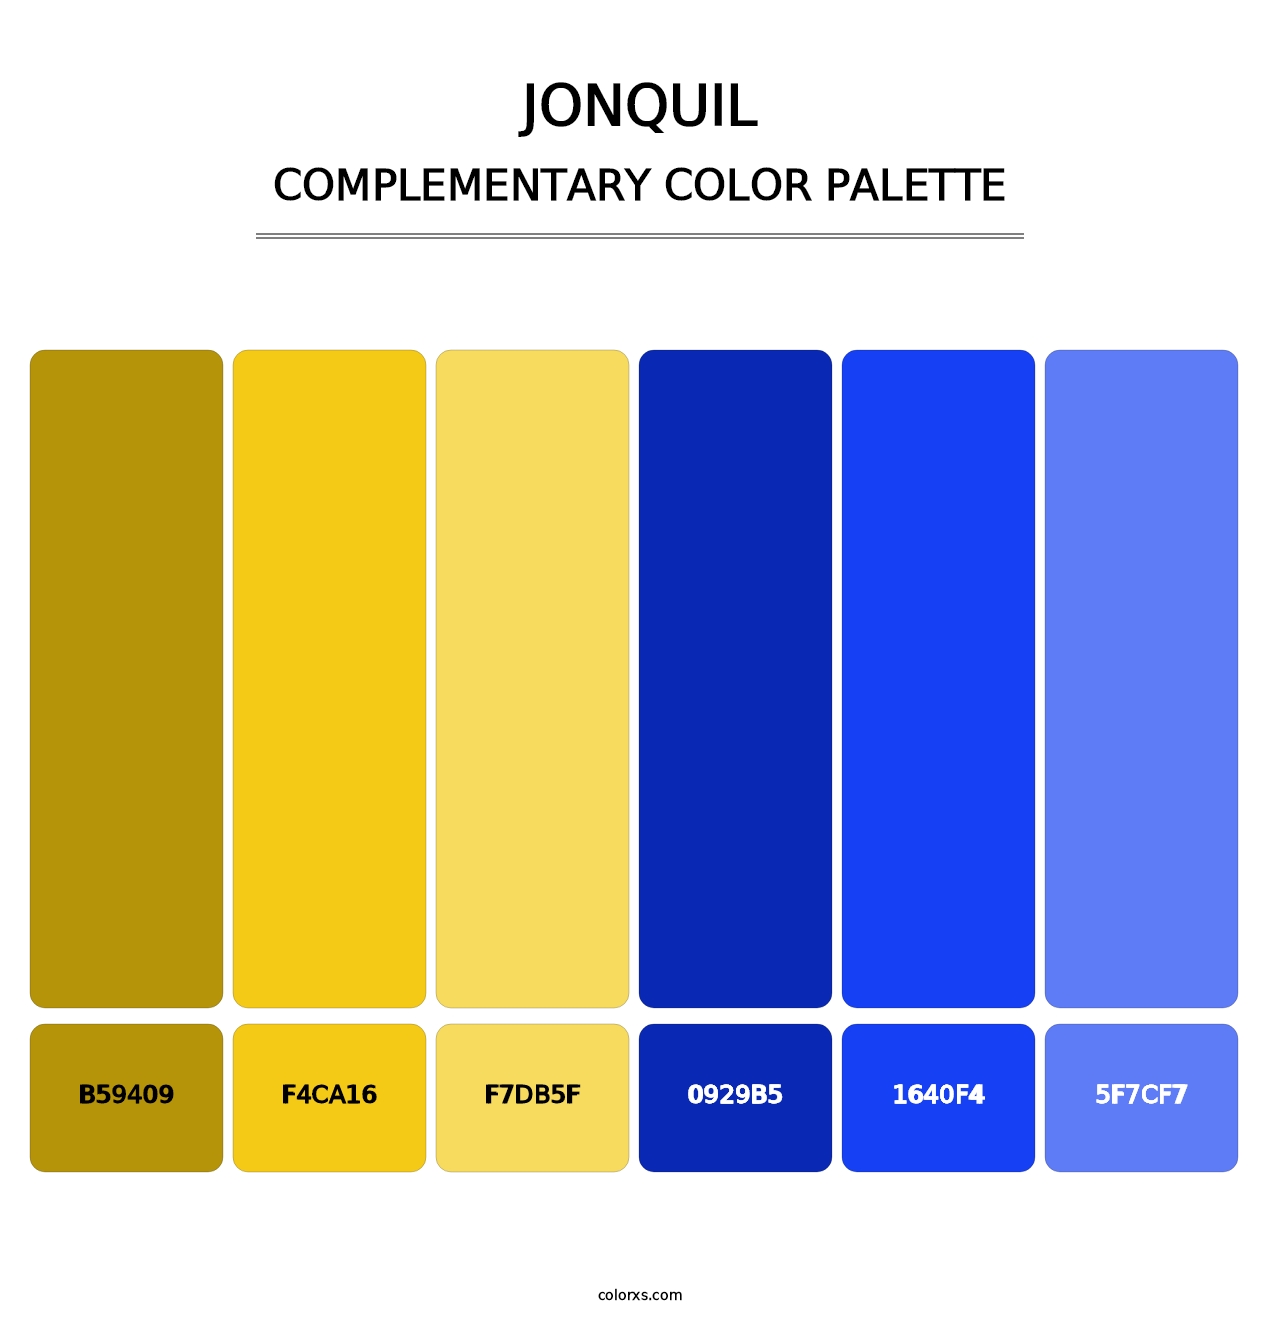 Jonquil - Complementary Color Palette